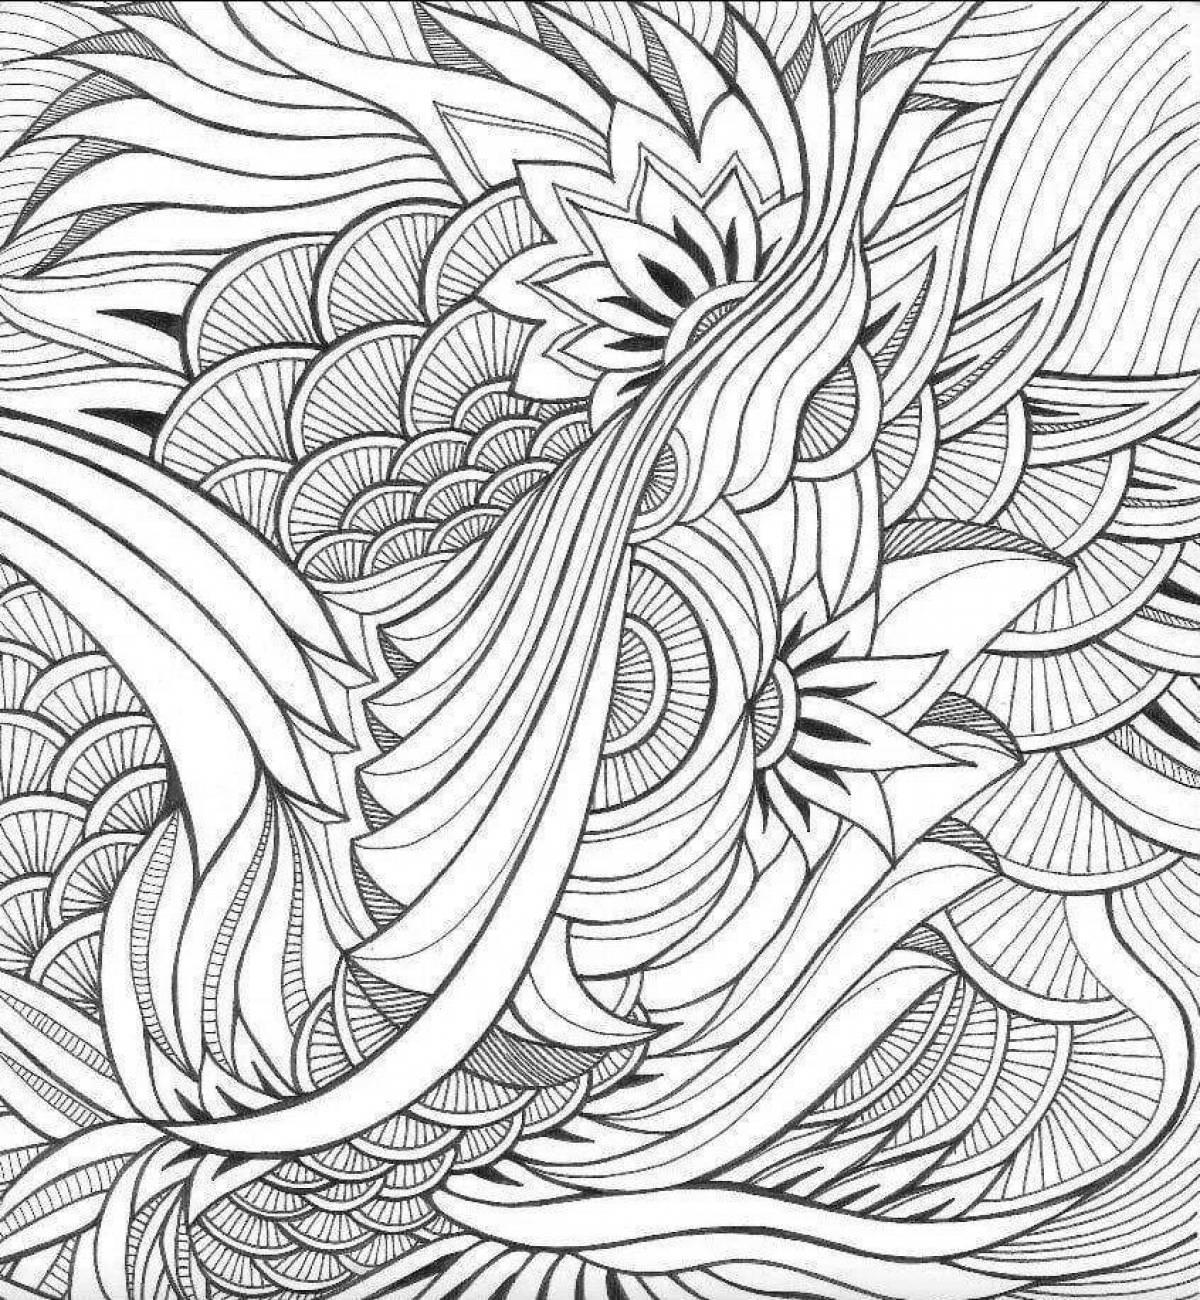 Coloring book magical anti-stress art therapy